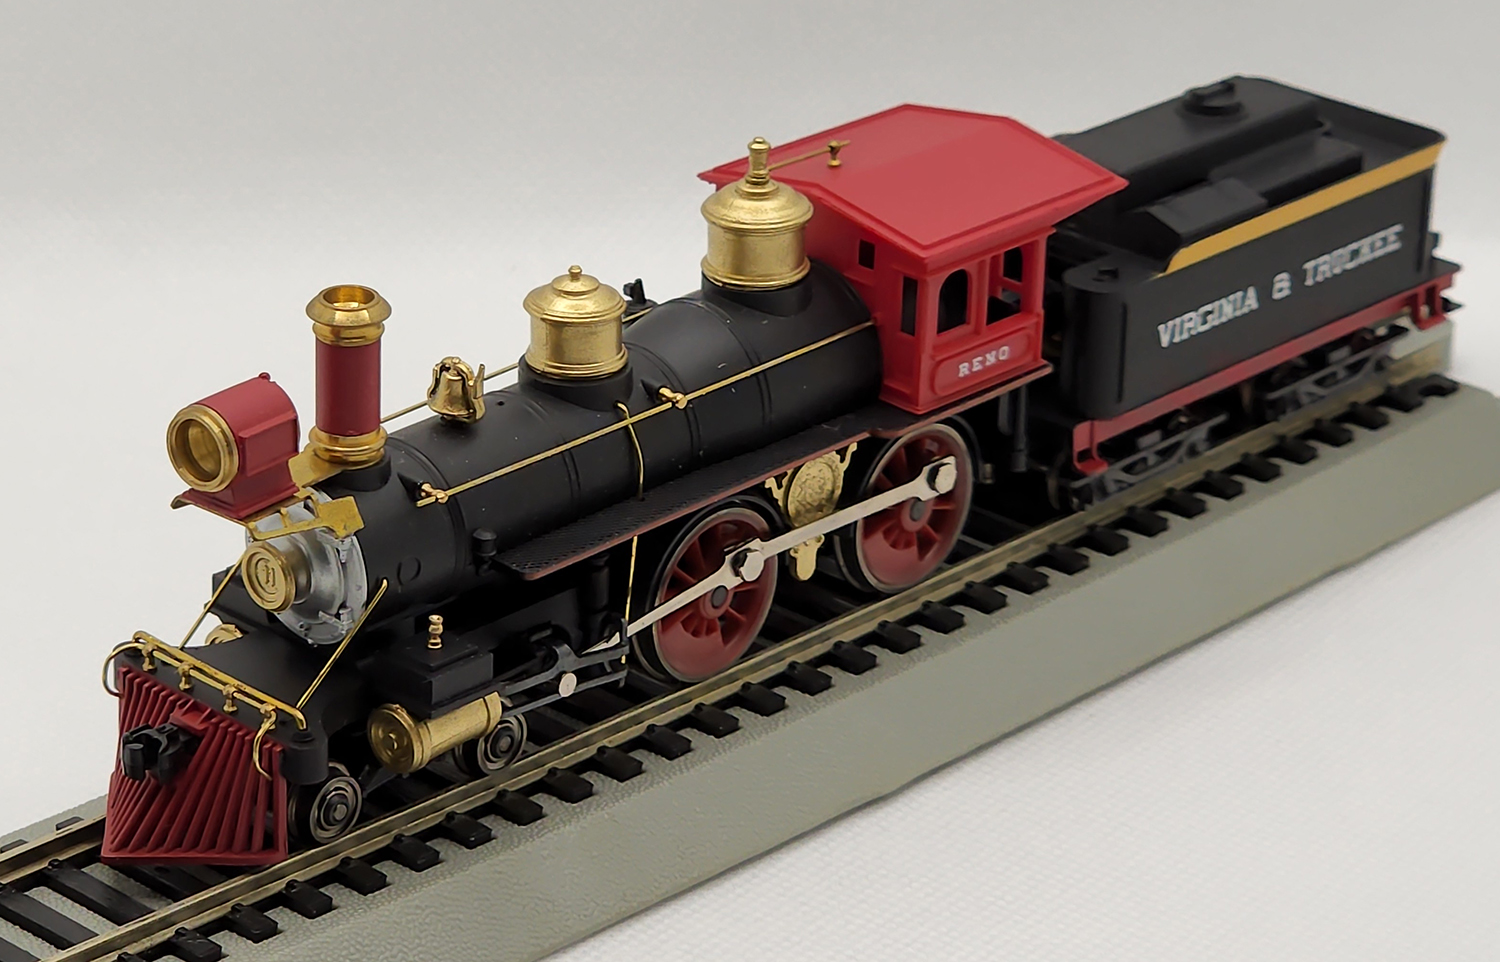 3rd view of the Rivarossi Virginia & Truckee Steam Locomotive #5418 4-4-0 Reno in my HO-scale Collection